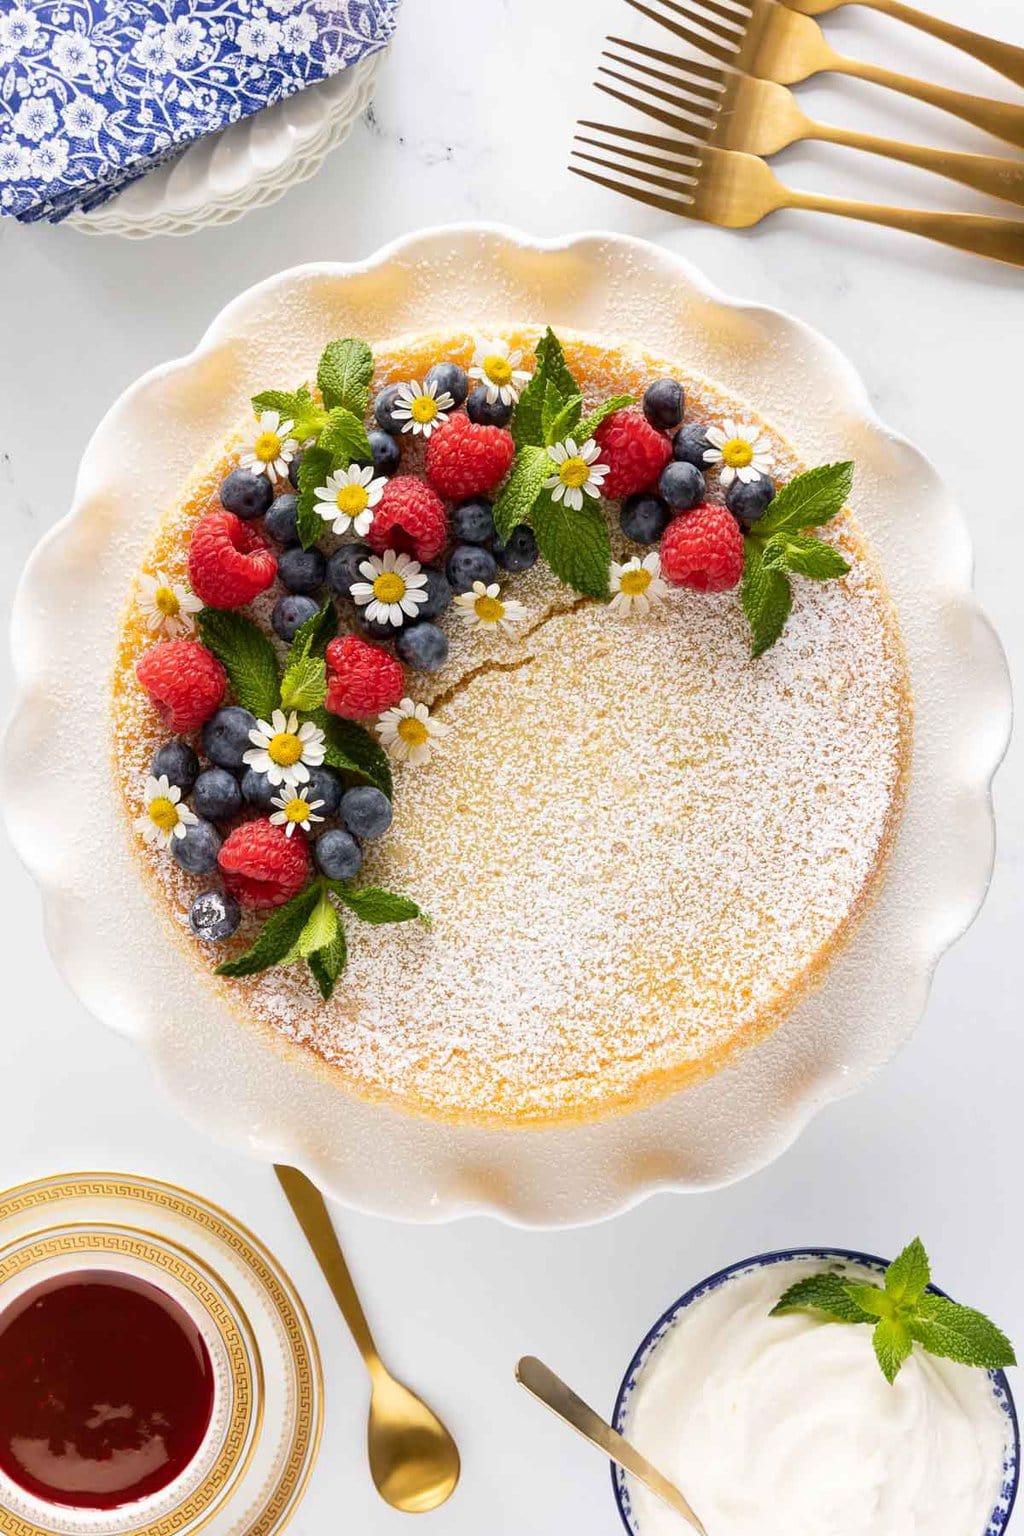 Vertical overhead photo of a Ridiculously Easy Crustless Lemon Tart decorated with fresh fruit, mint leaves and edible flowers.